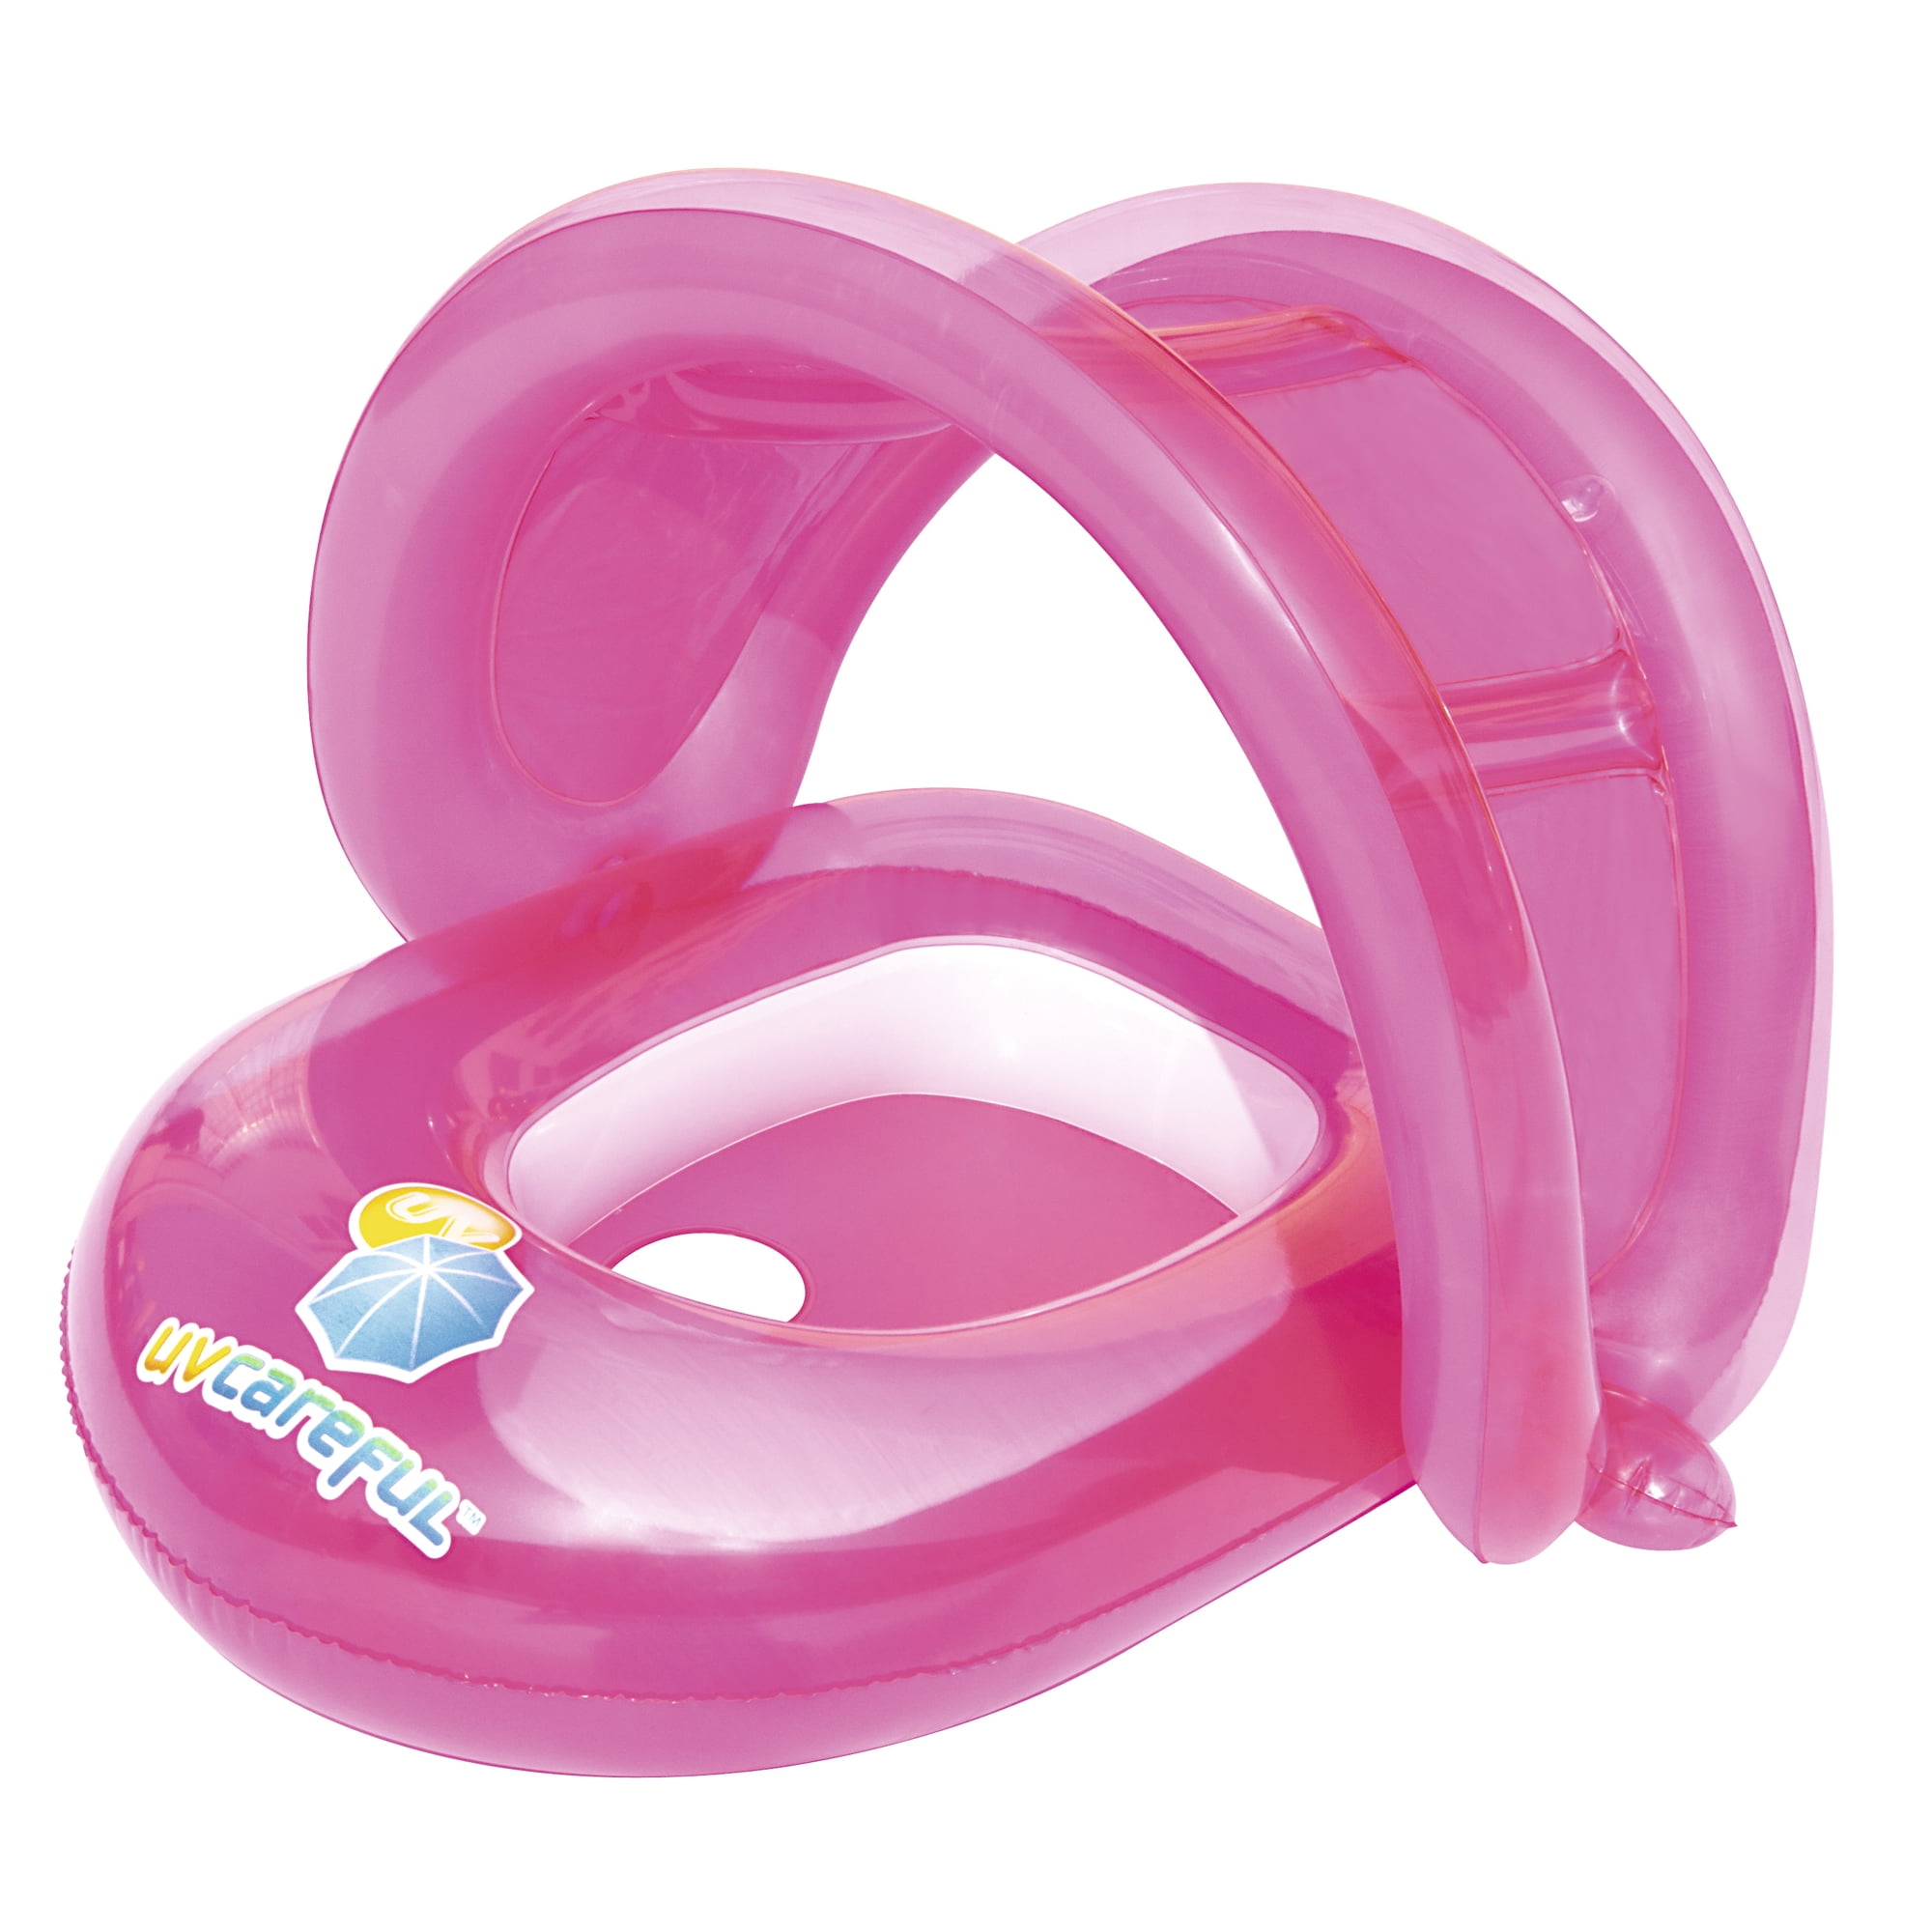 Details about   SPLASH AND PLAY UV BABY CARE SEAT 